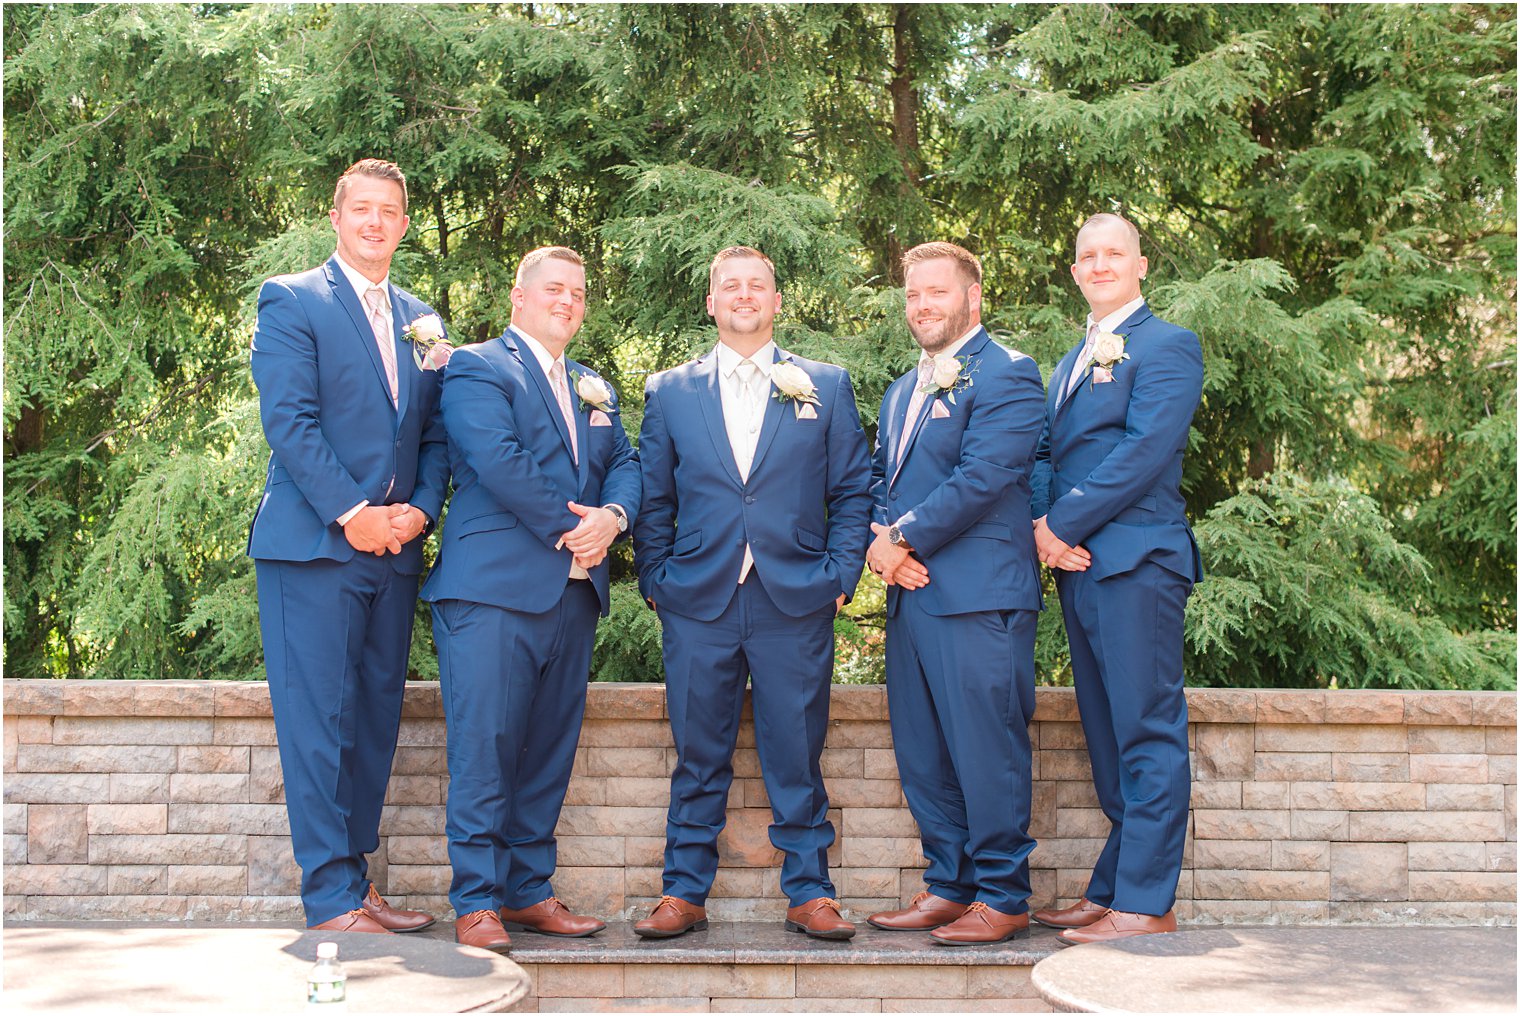 groom stands with groomsmen in navy suits by brick wall at Brigalia's